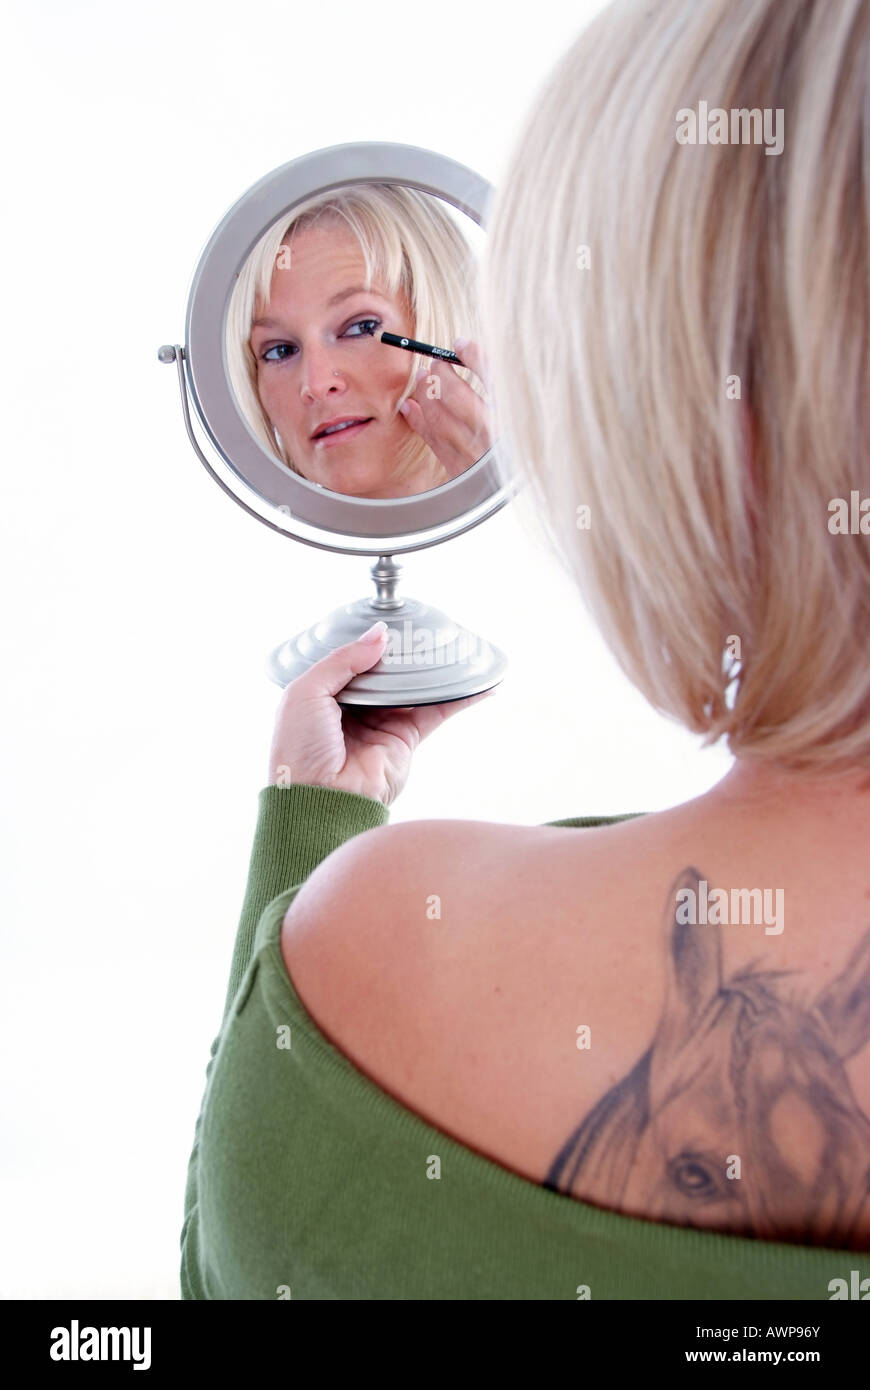 woman looking into mirror Stock Photo